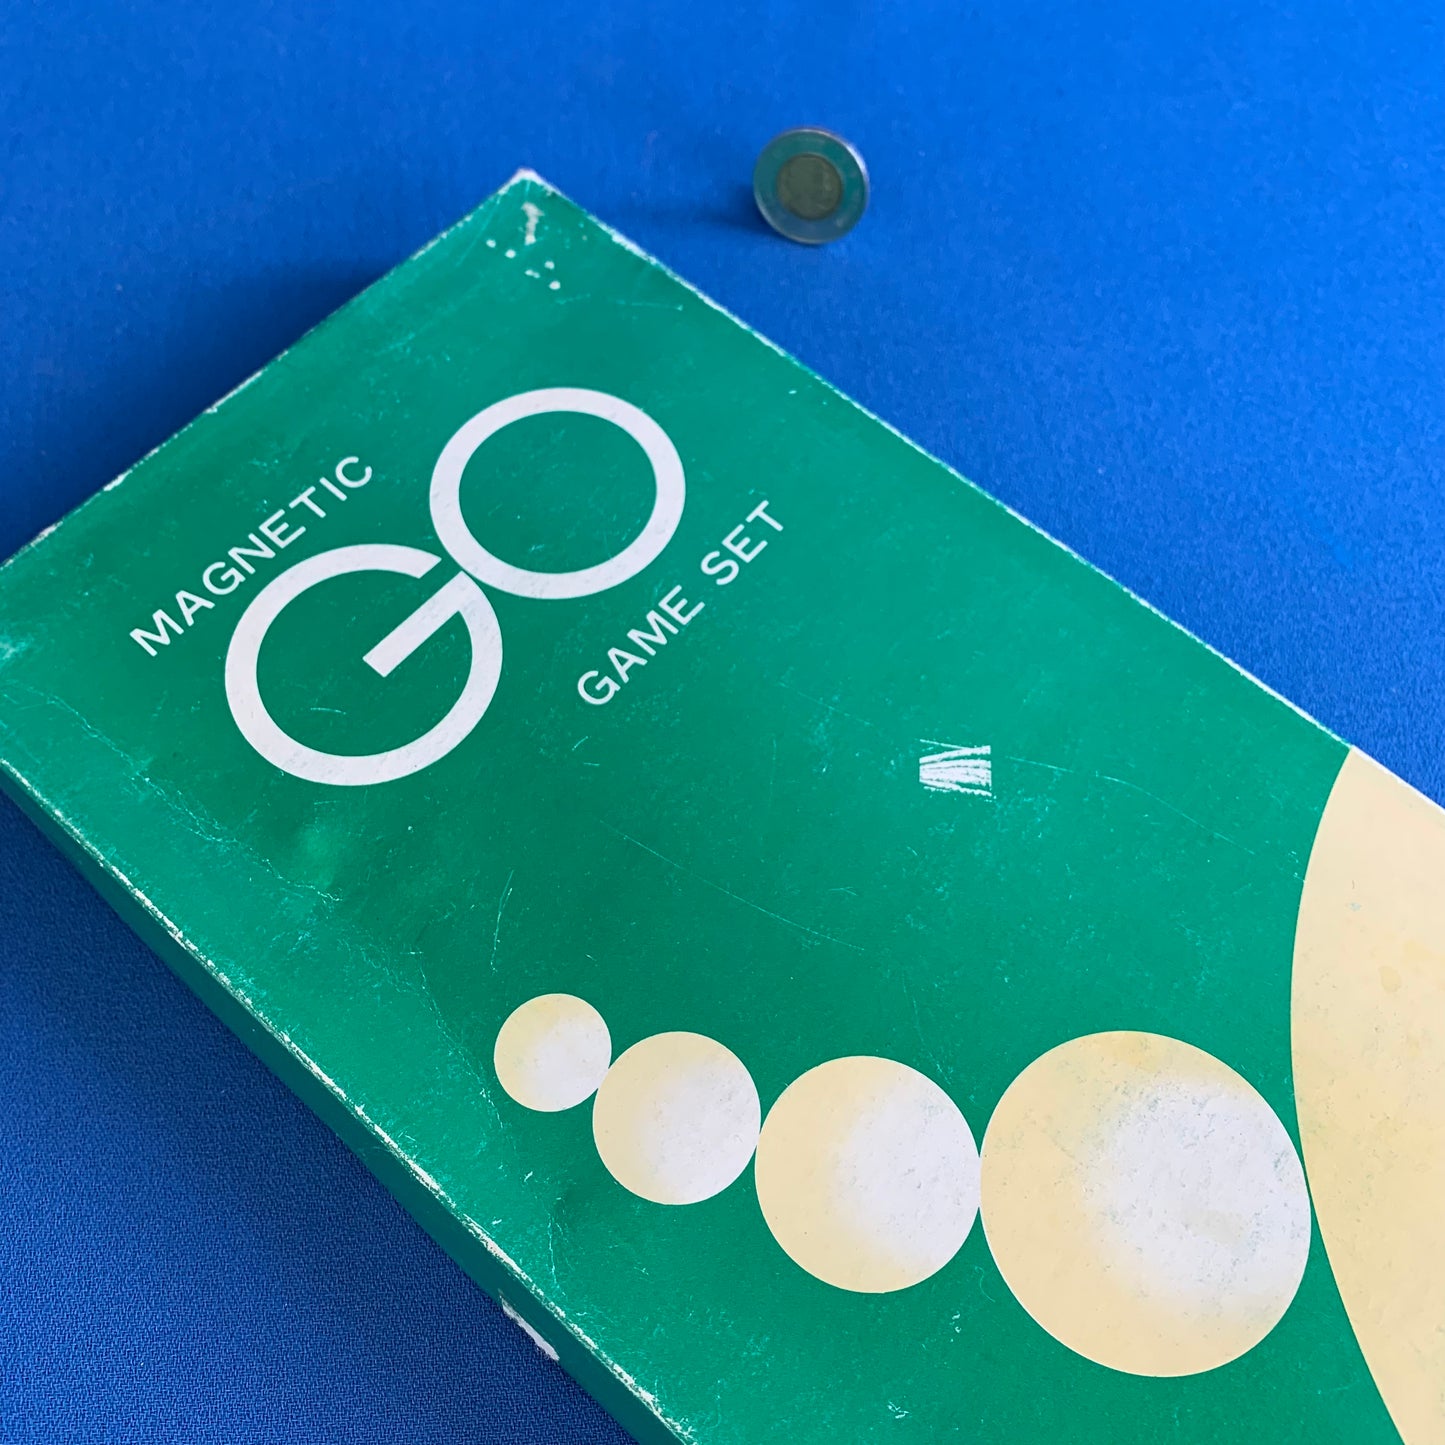 magnetic go board game